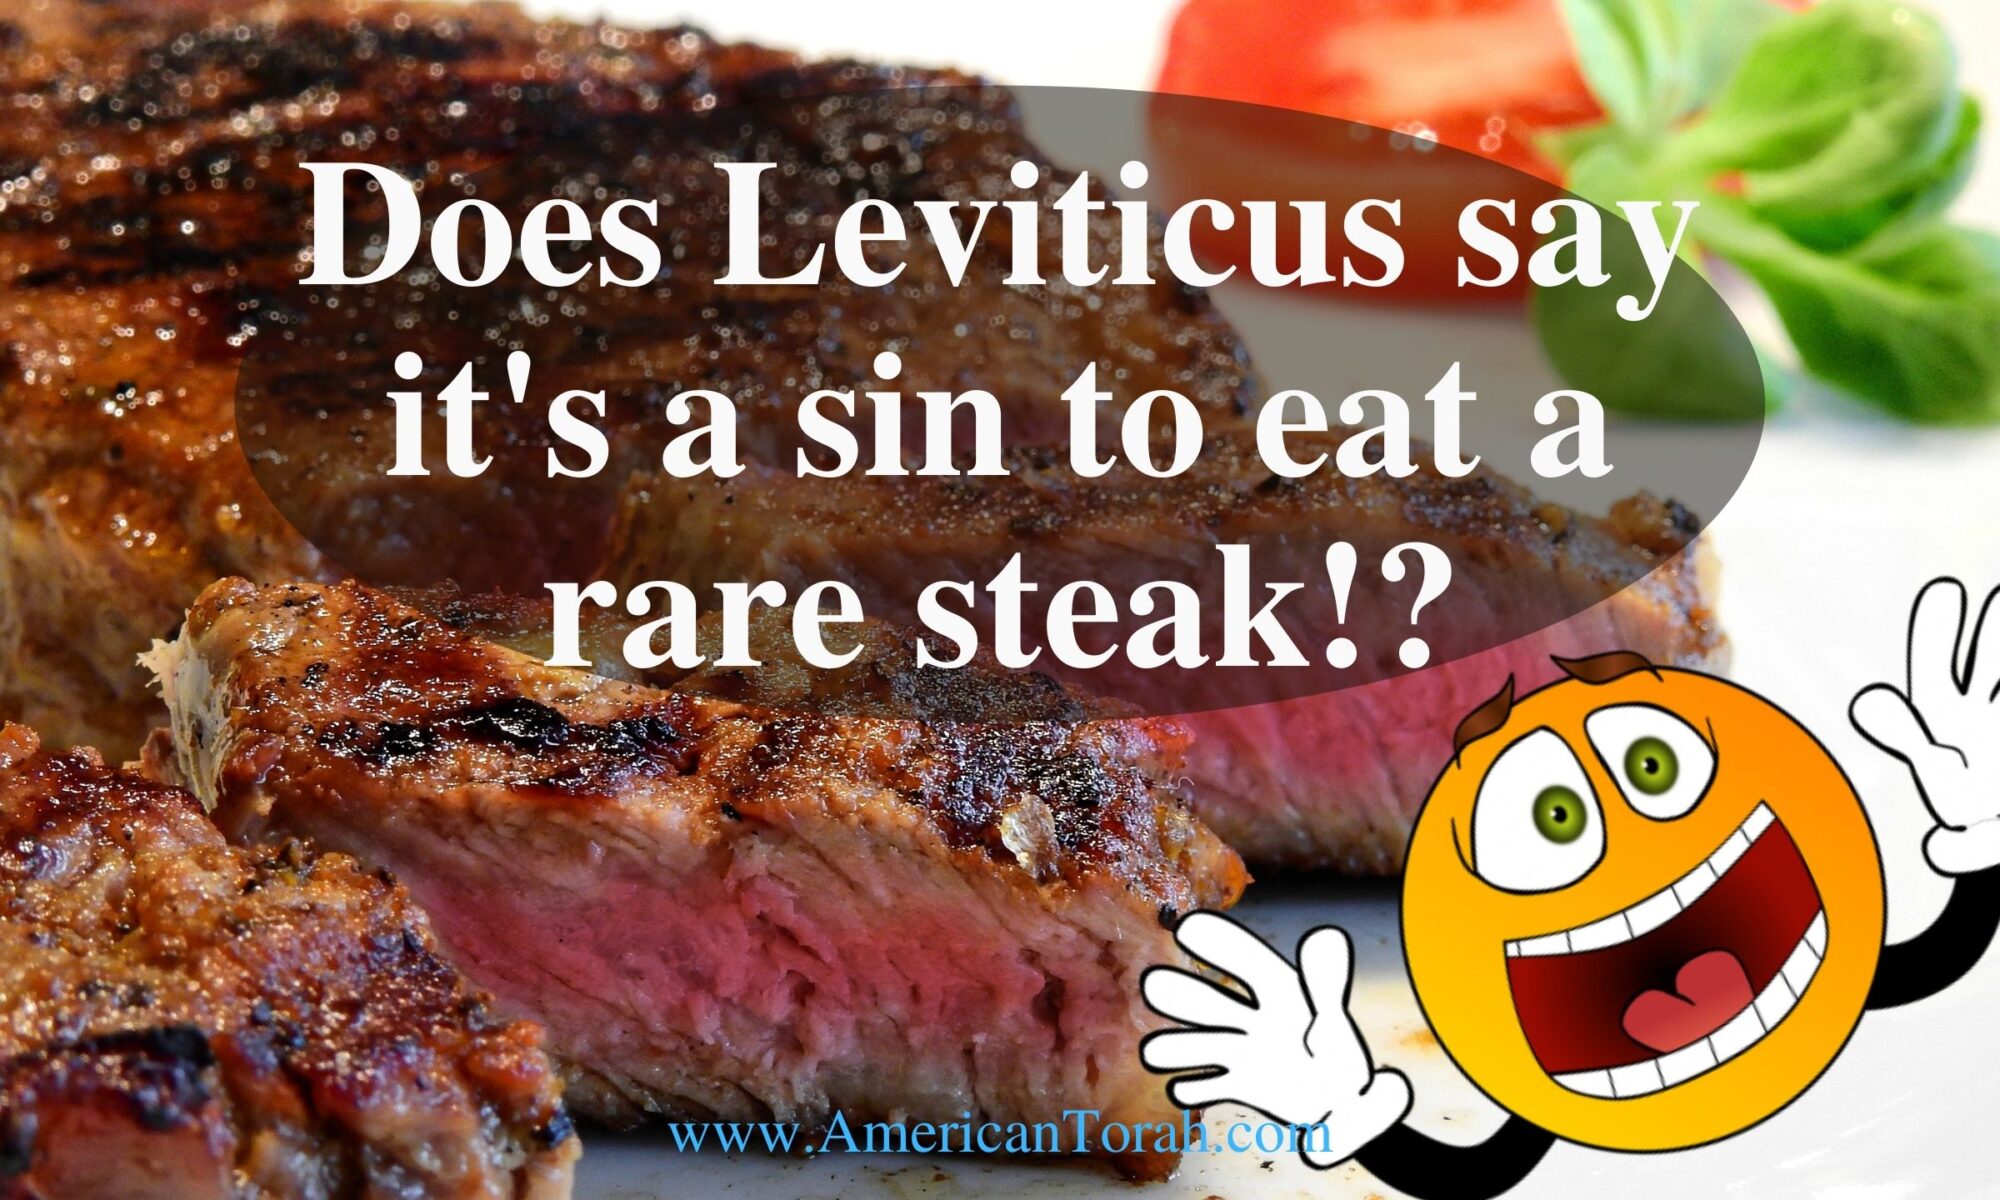 Does Leviticus 17 say it's a sin to eat rare meat?